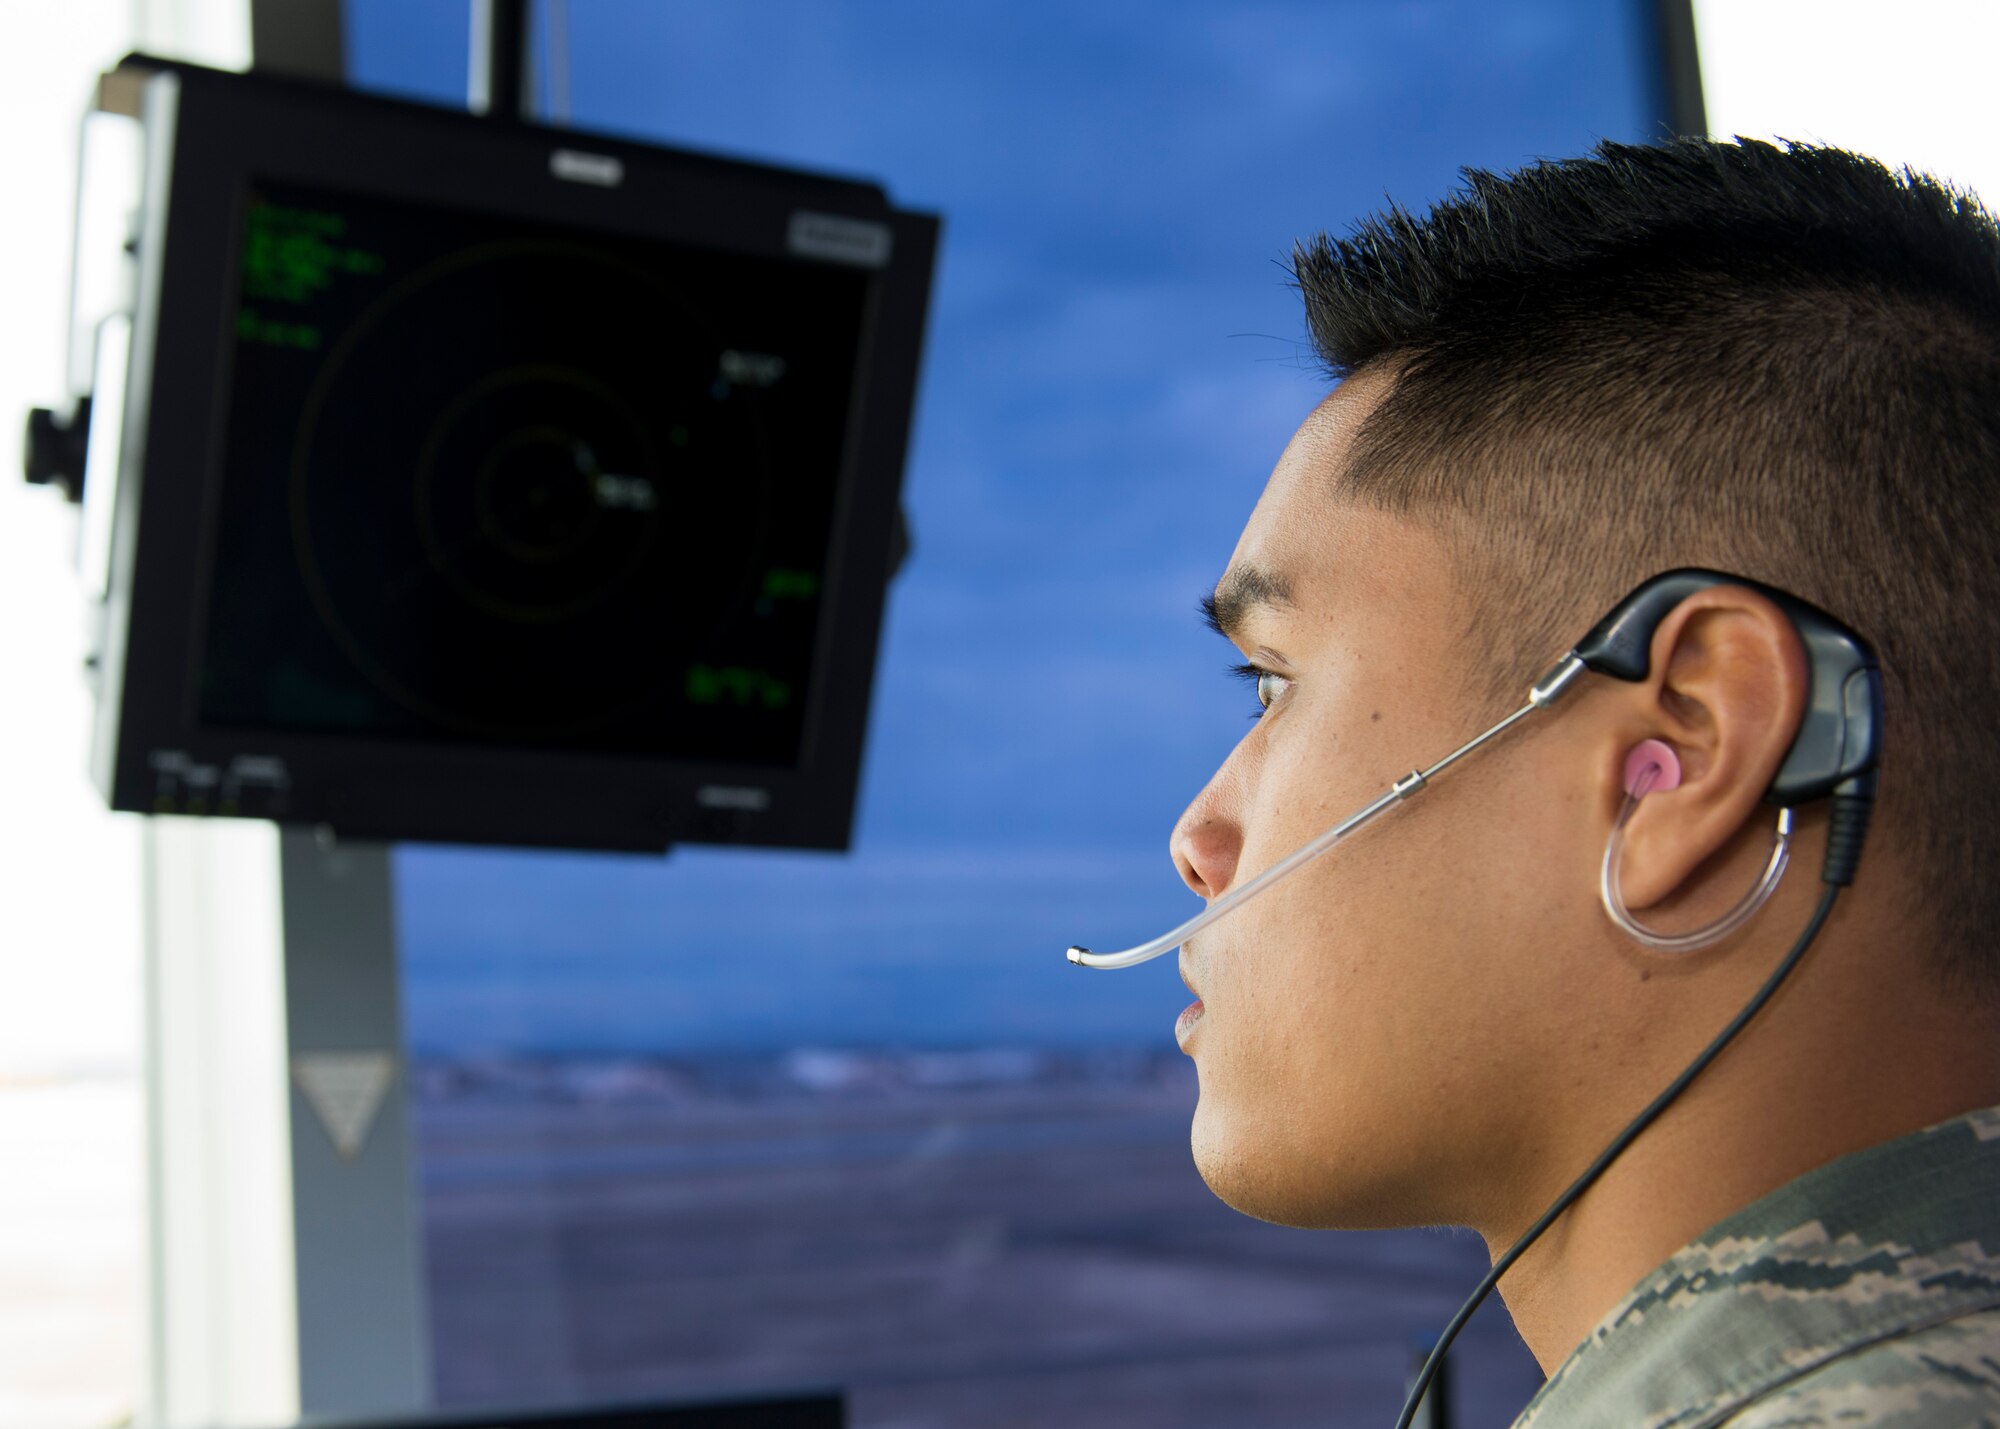 Airman 1st Class Alan Lucero, 92nd Operations Support Squadron air traffic controller, checks the Doppler radar during Exercise Global Thunder 2018 at Fairchild Air Force Base, Washington, Nov. 1, 2017. Global Thunder is an annual U.S. Strategic Command (USSTRATCOM) exercise designed to provide training opportunities to test and validate command, control and operational procedures. The training is based on a notional scenario developed to drive execution of USSTRATCOM and component forces’ ability to support the geographic combatant commands, deter adversaries and, if necessary, employ forces as directed by the President of the United States. (U.S. Air Force photo/Senior Airman Ryan Lackey)